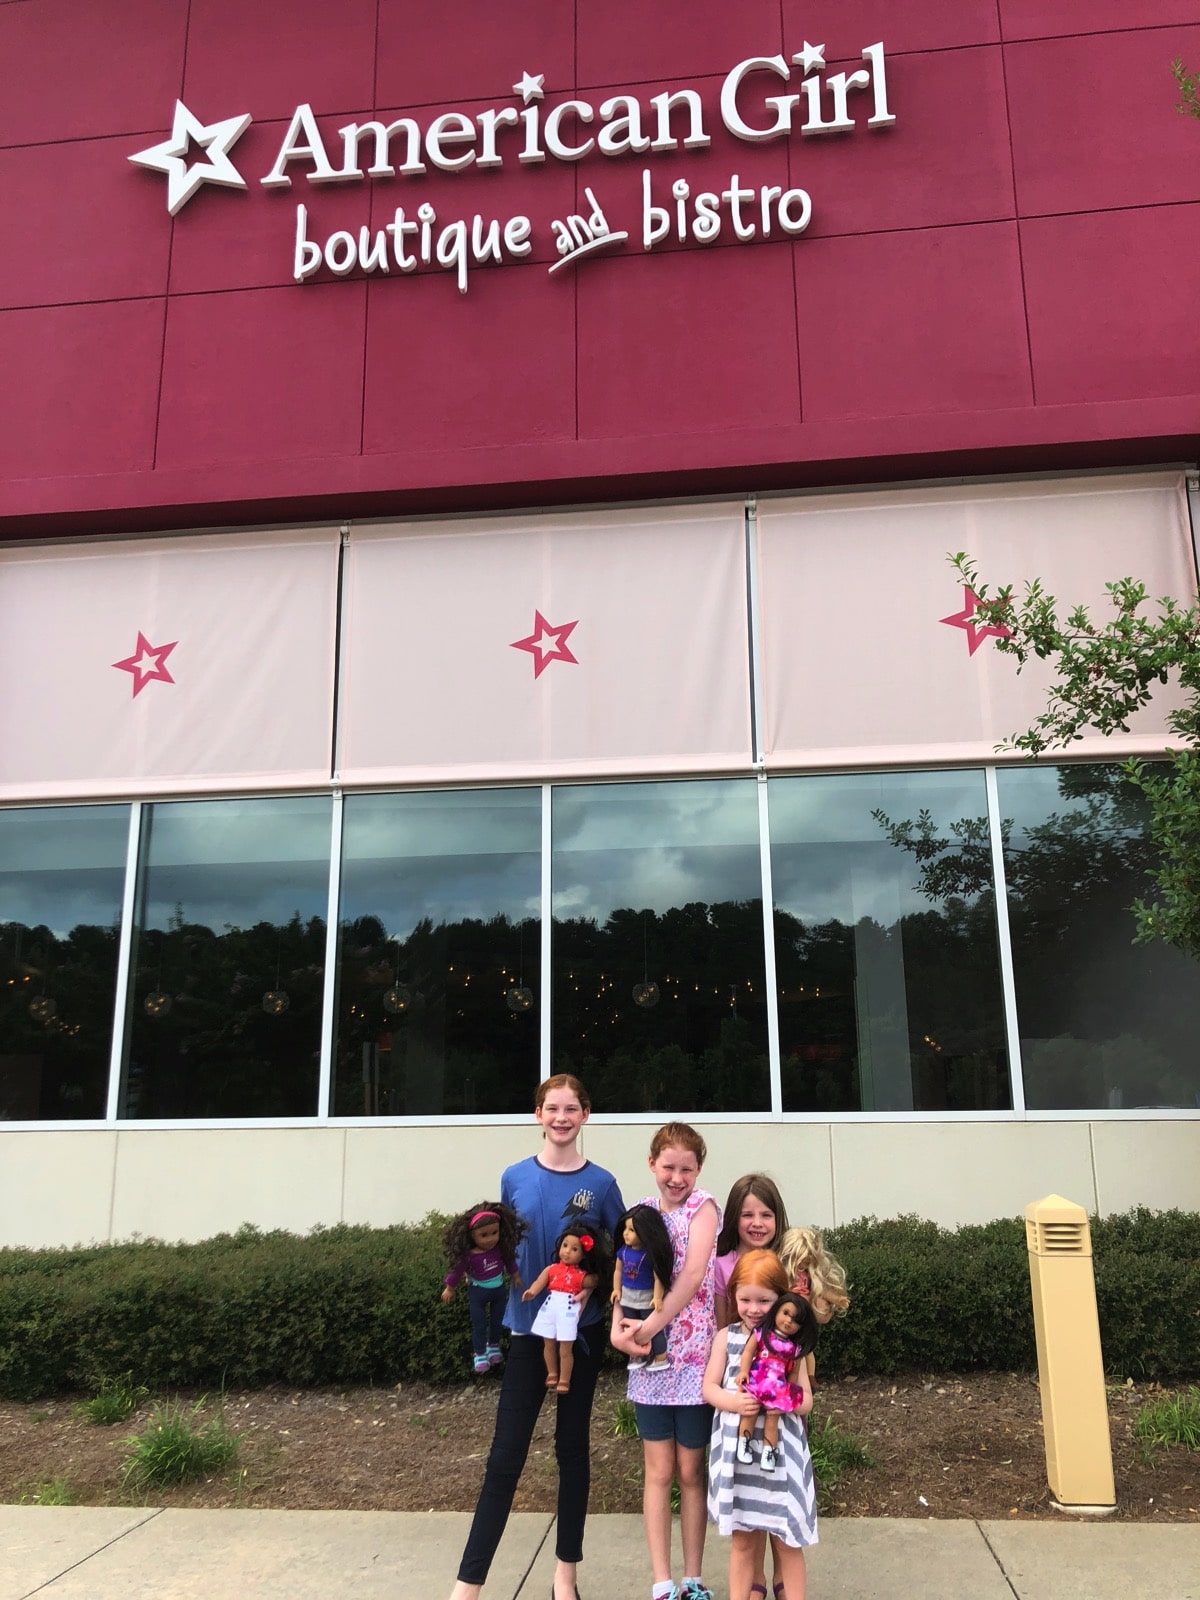 American Girl Store Boutique and Bistro